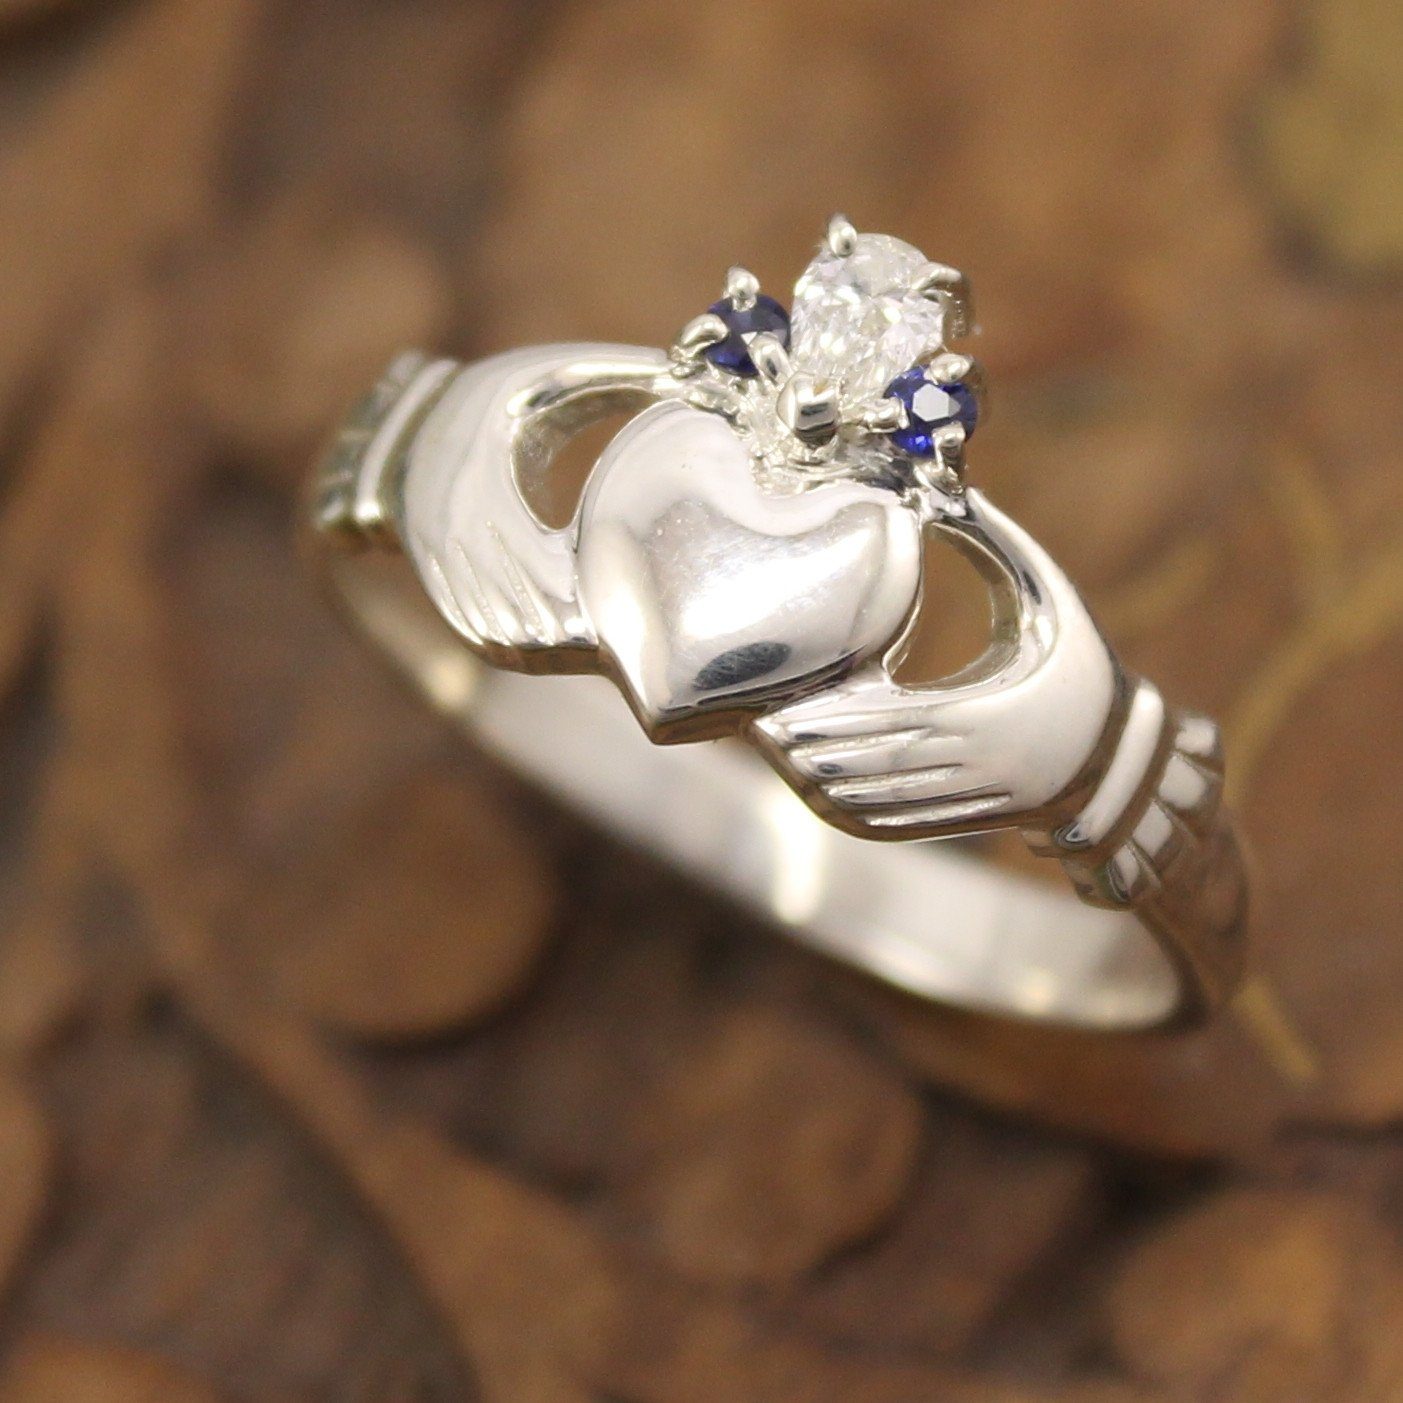 Jewelry - Diamond And Sapphire 14K Gold Claddagh Ring.